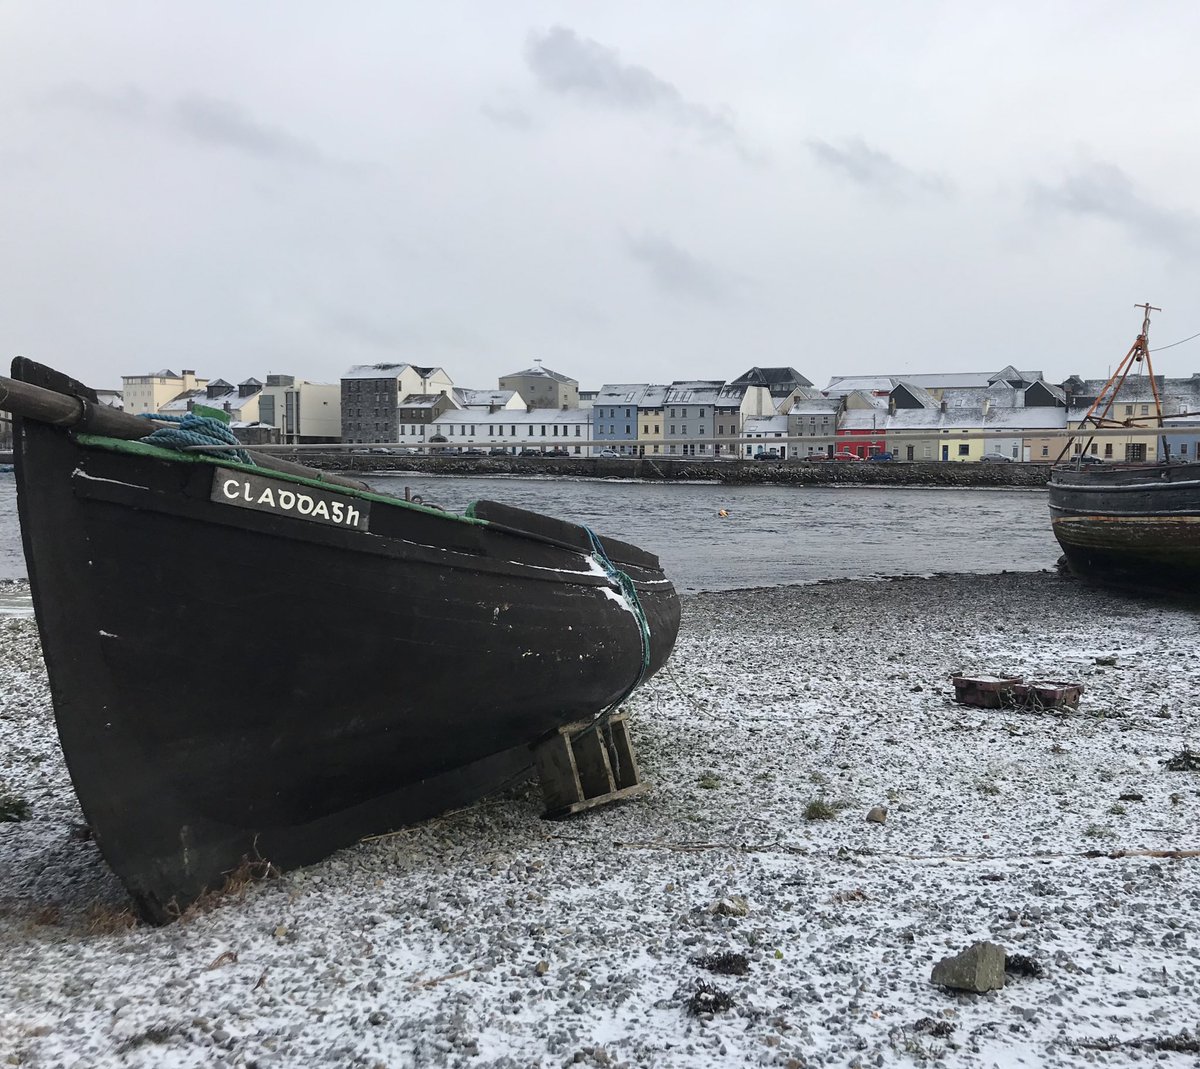 There’s no day like a snow day in Galway ❄️🤍 (1/3/18)

#LoveGalway #MarchSnow